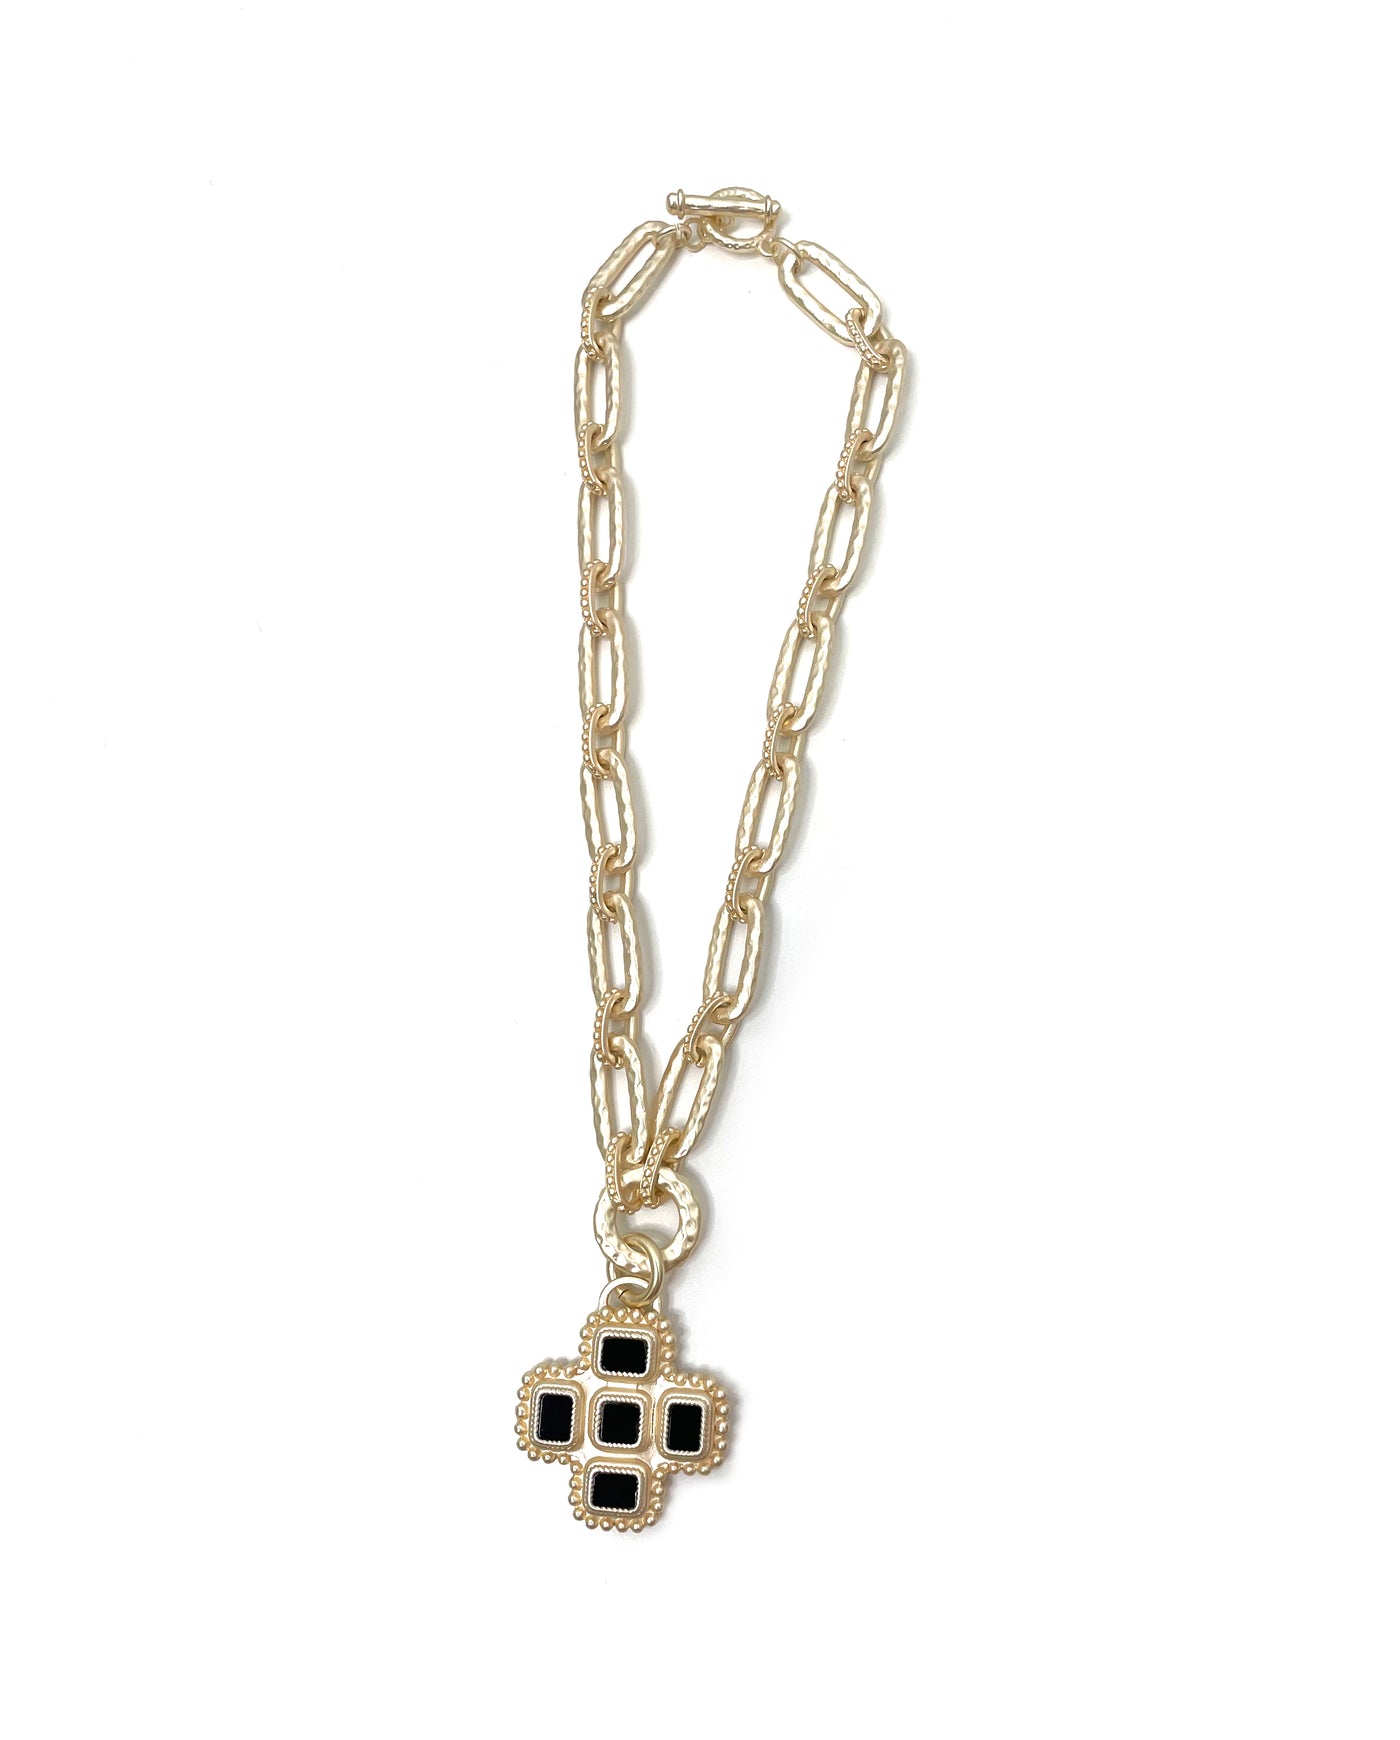 Dolce Cross Necklace